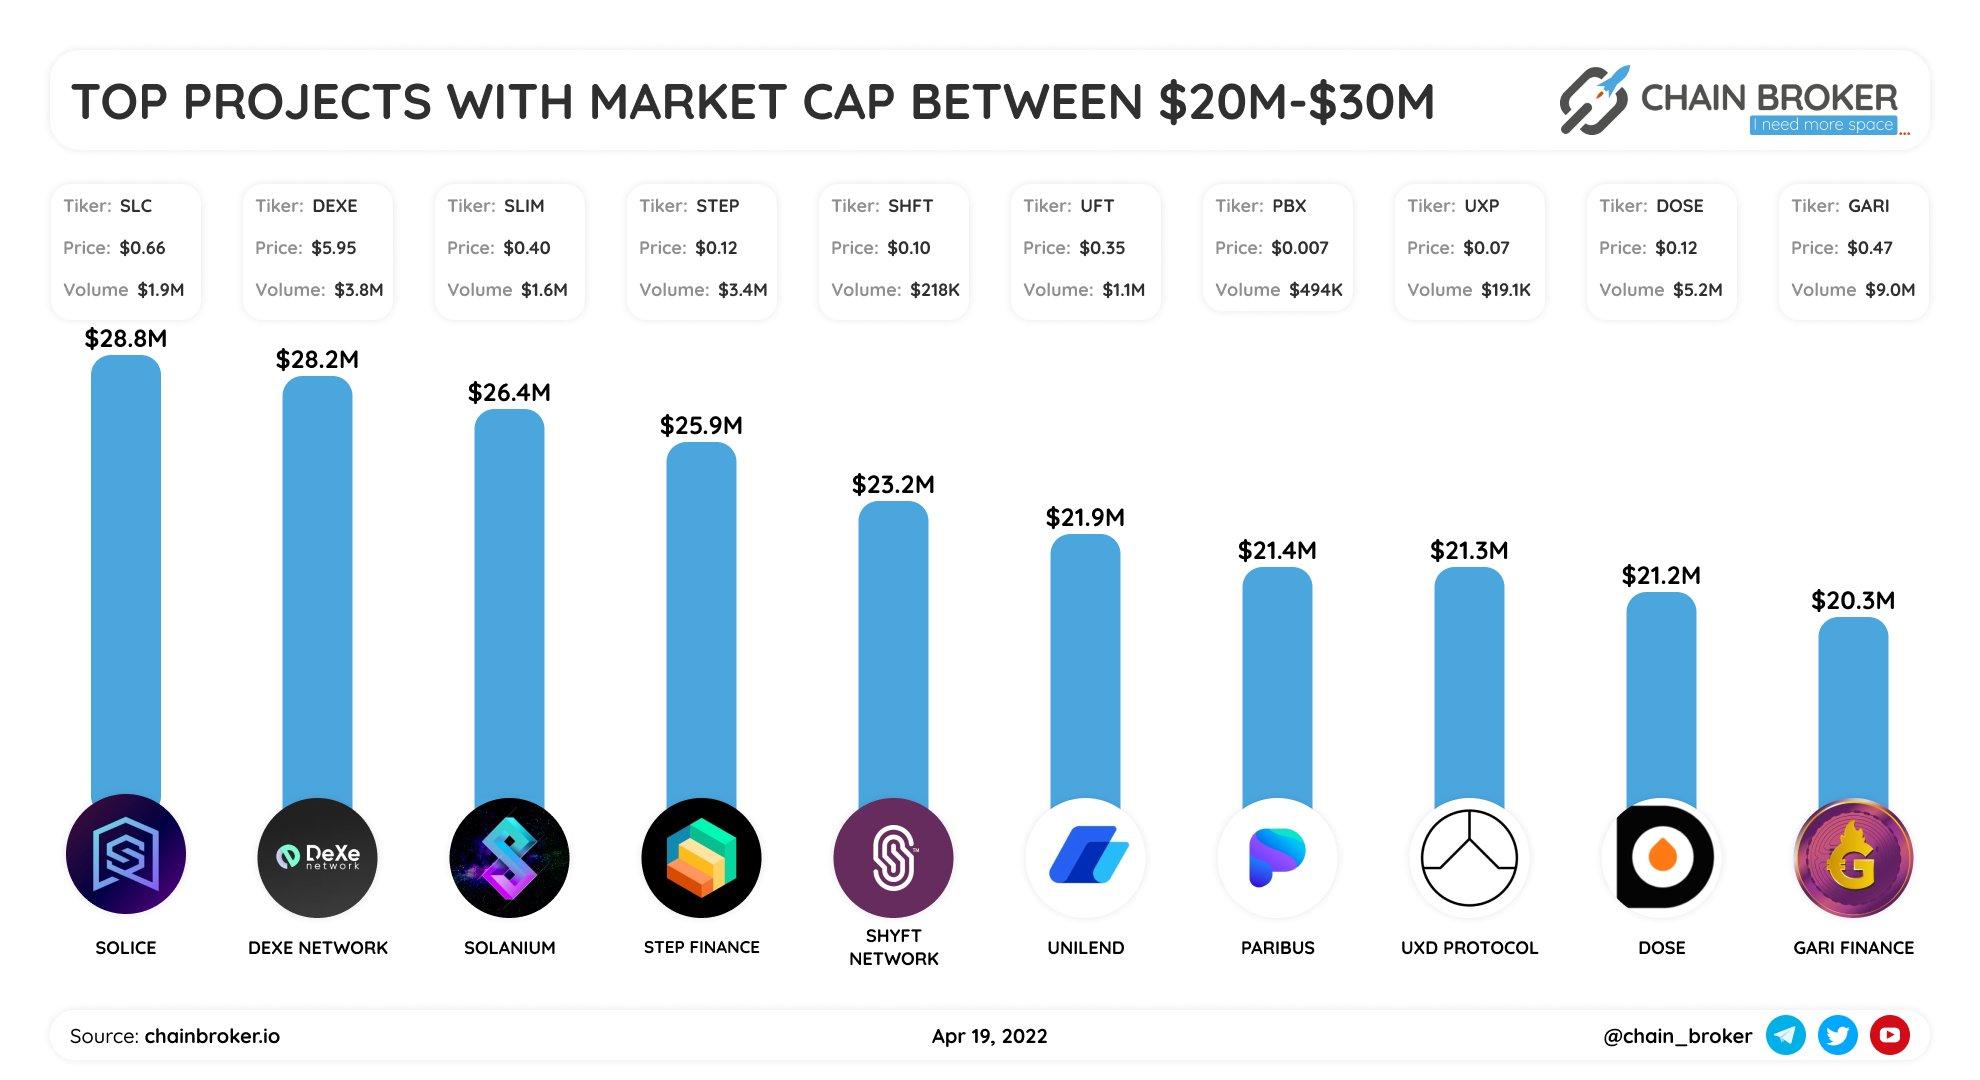 Top projects with market cap between $20M-$30M